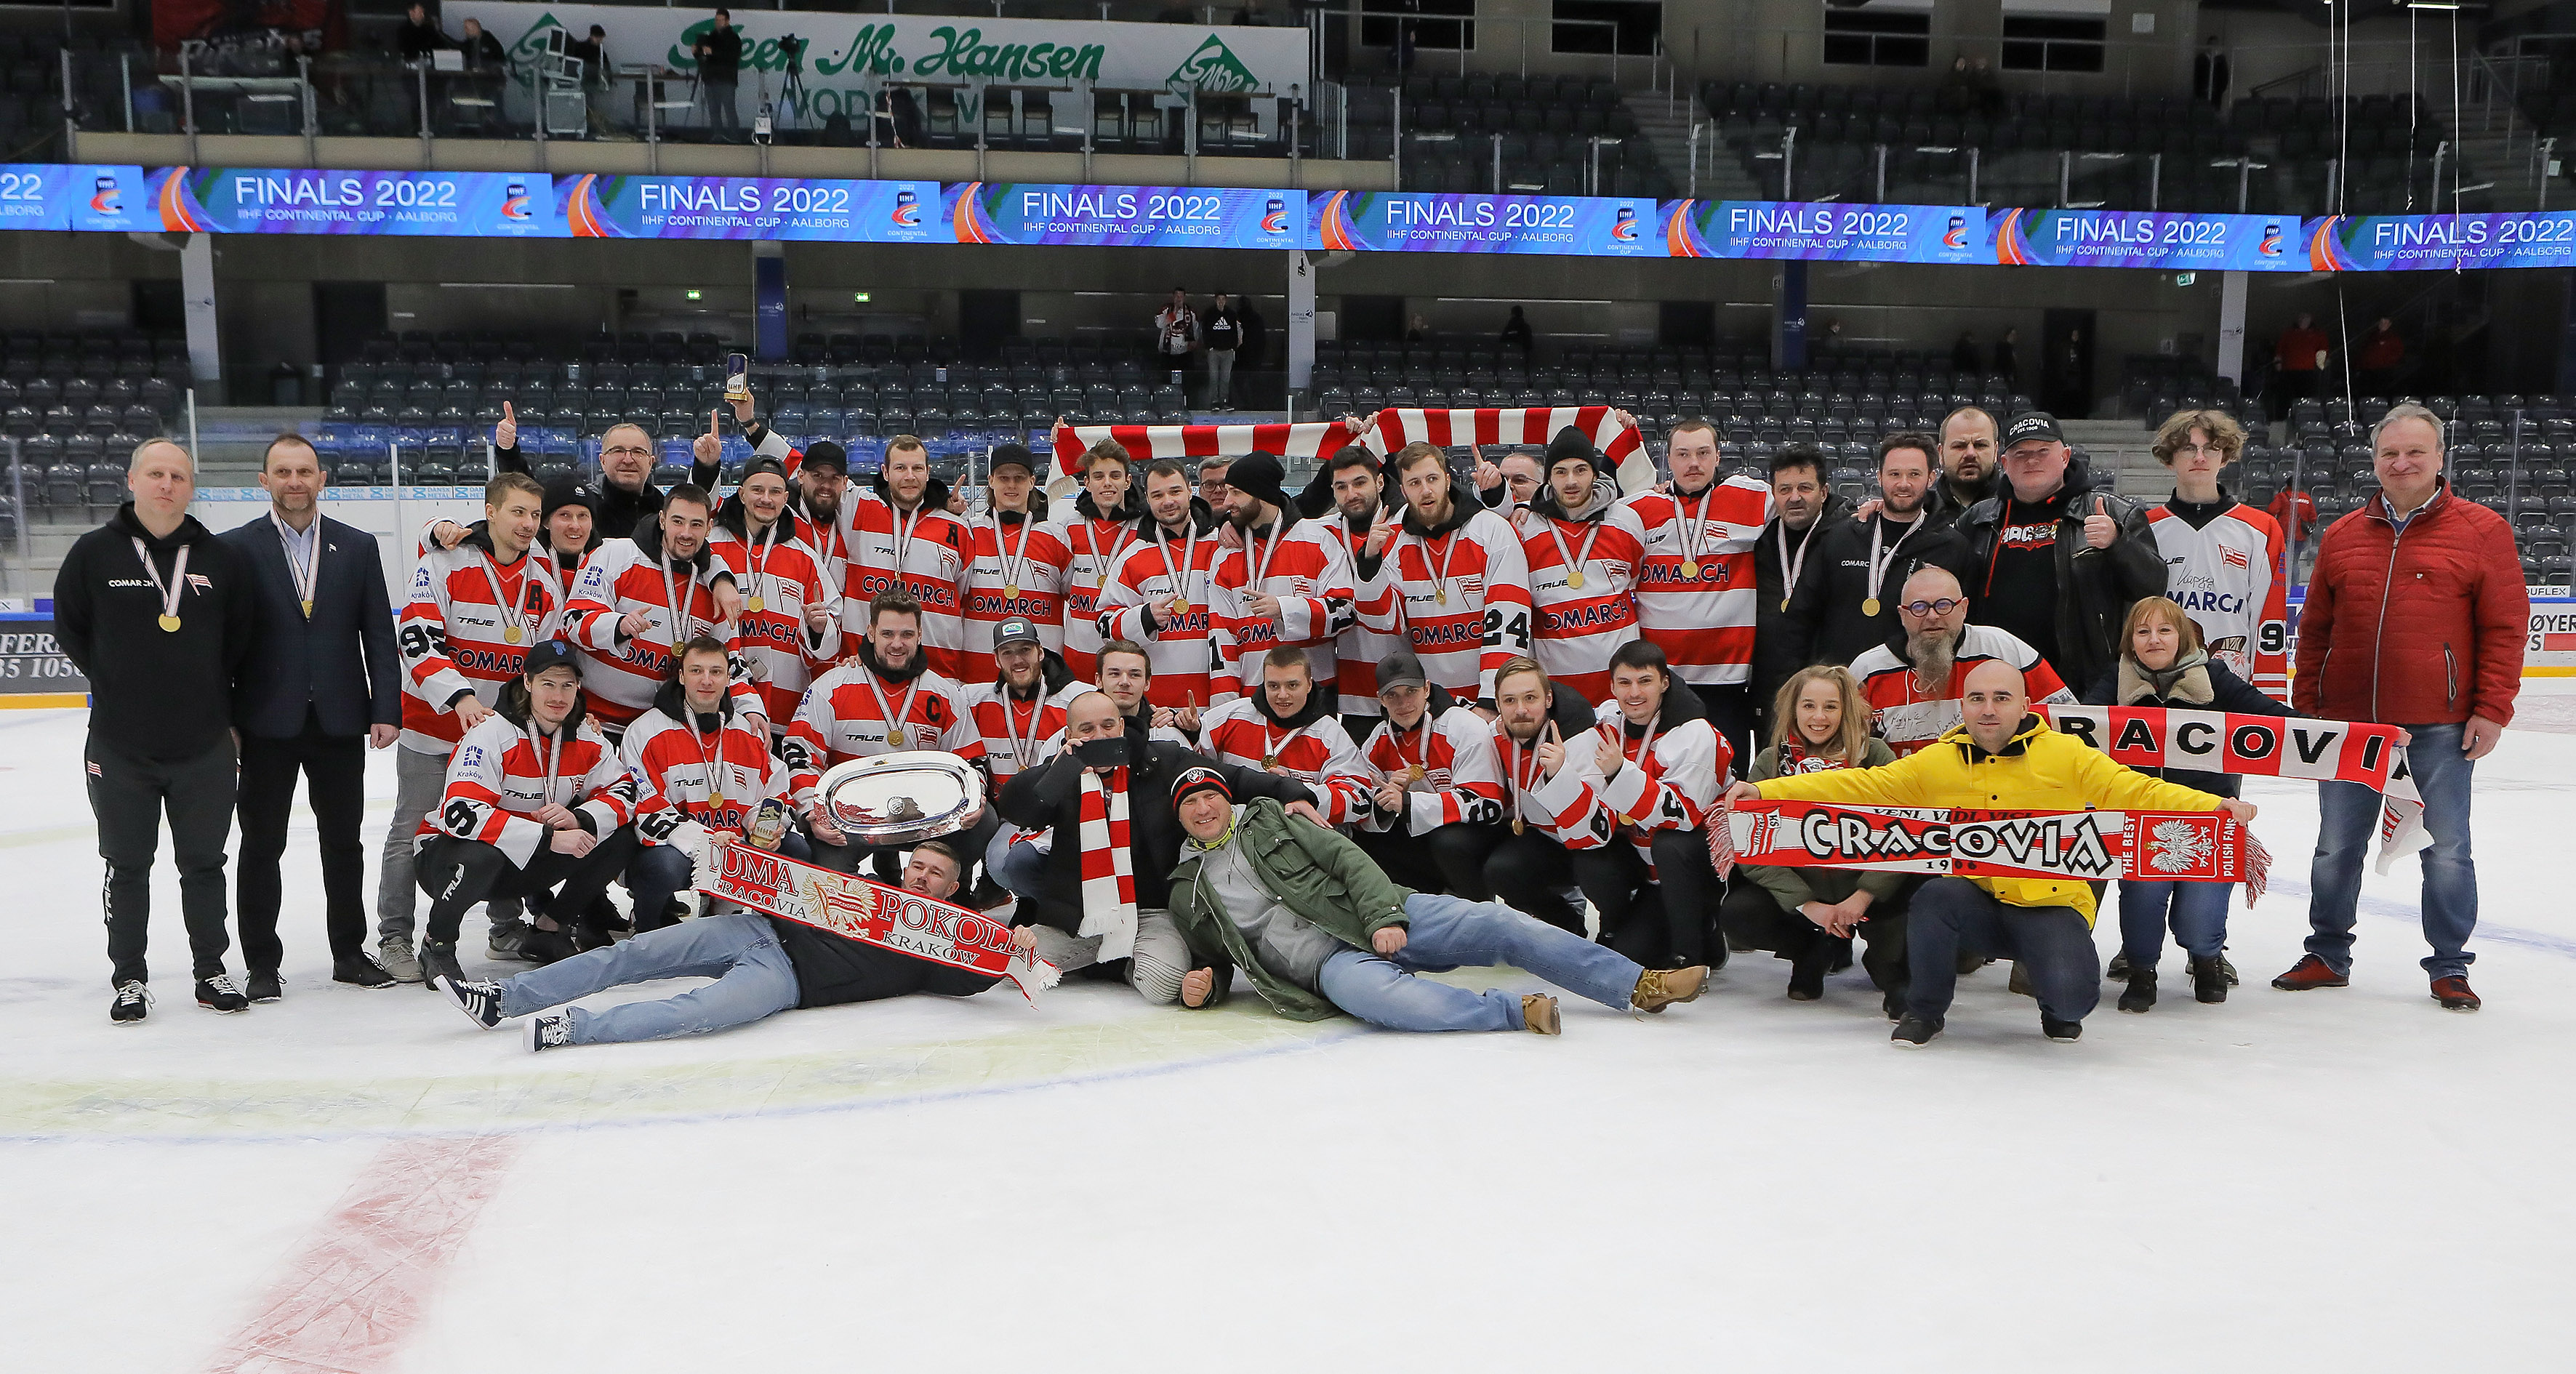 Comarch Cracovia are the 2022 IIHF Continental Cup Champions!